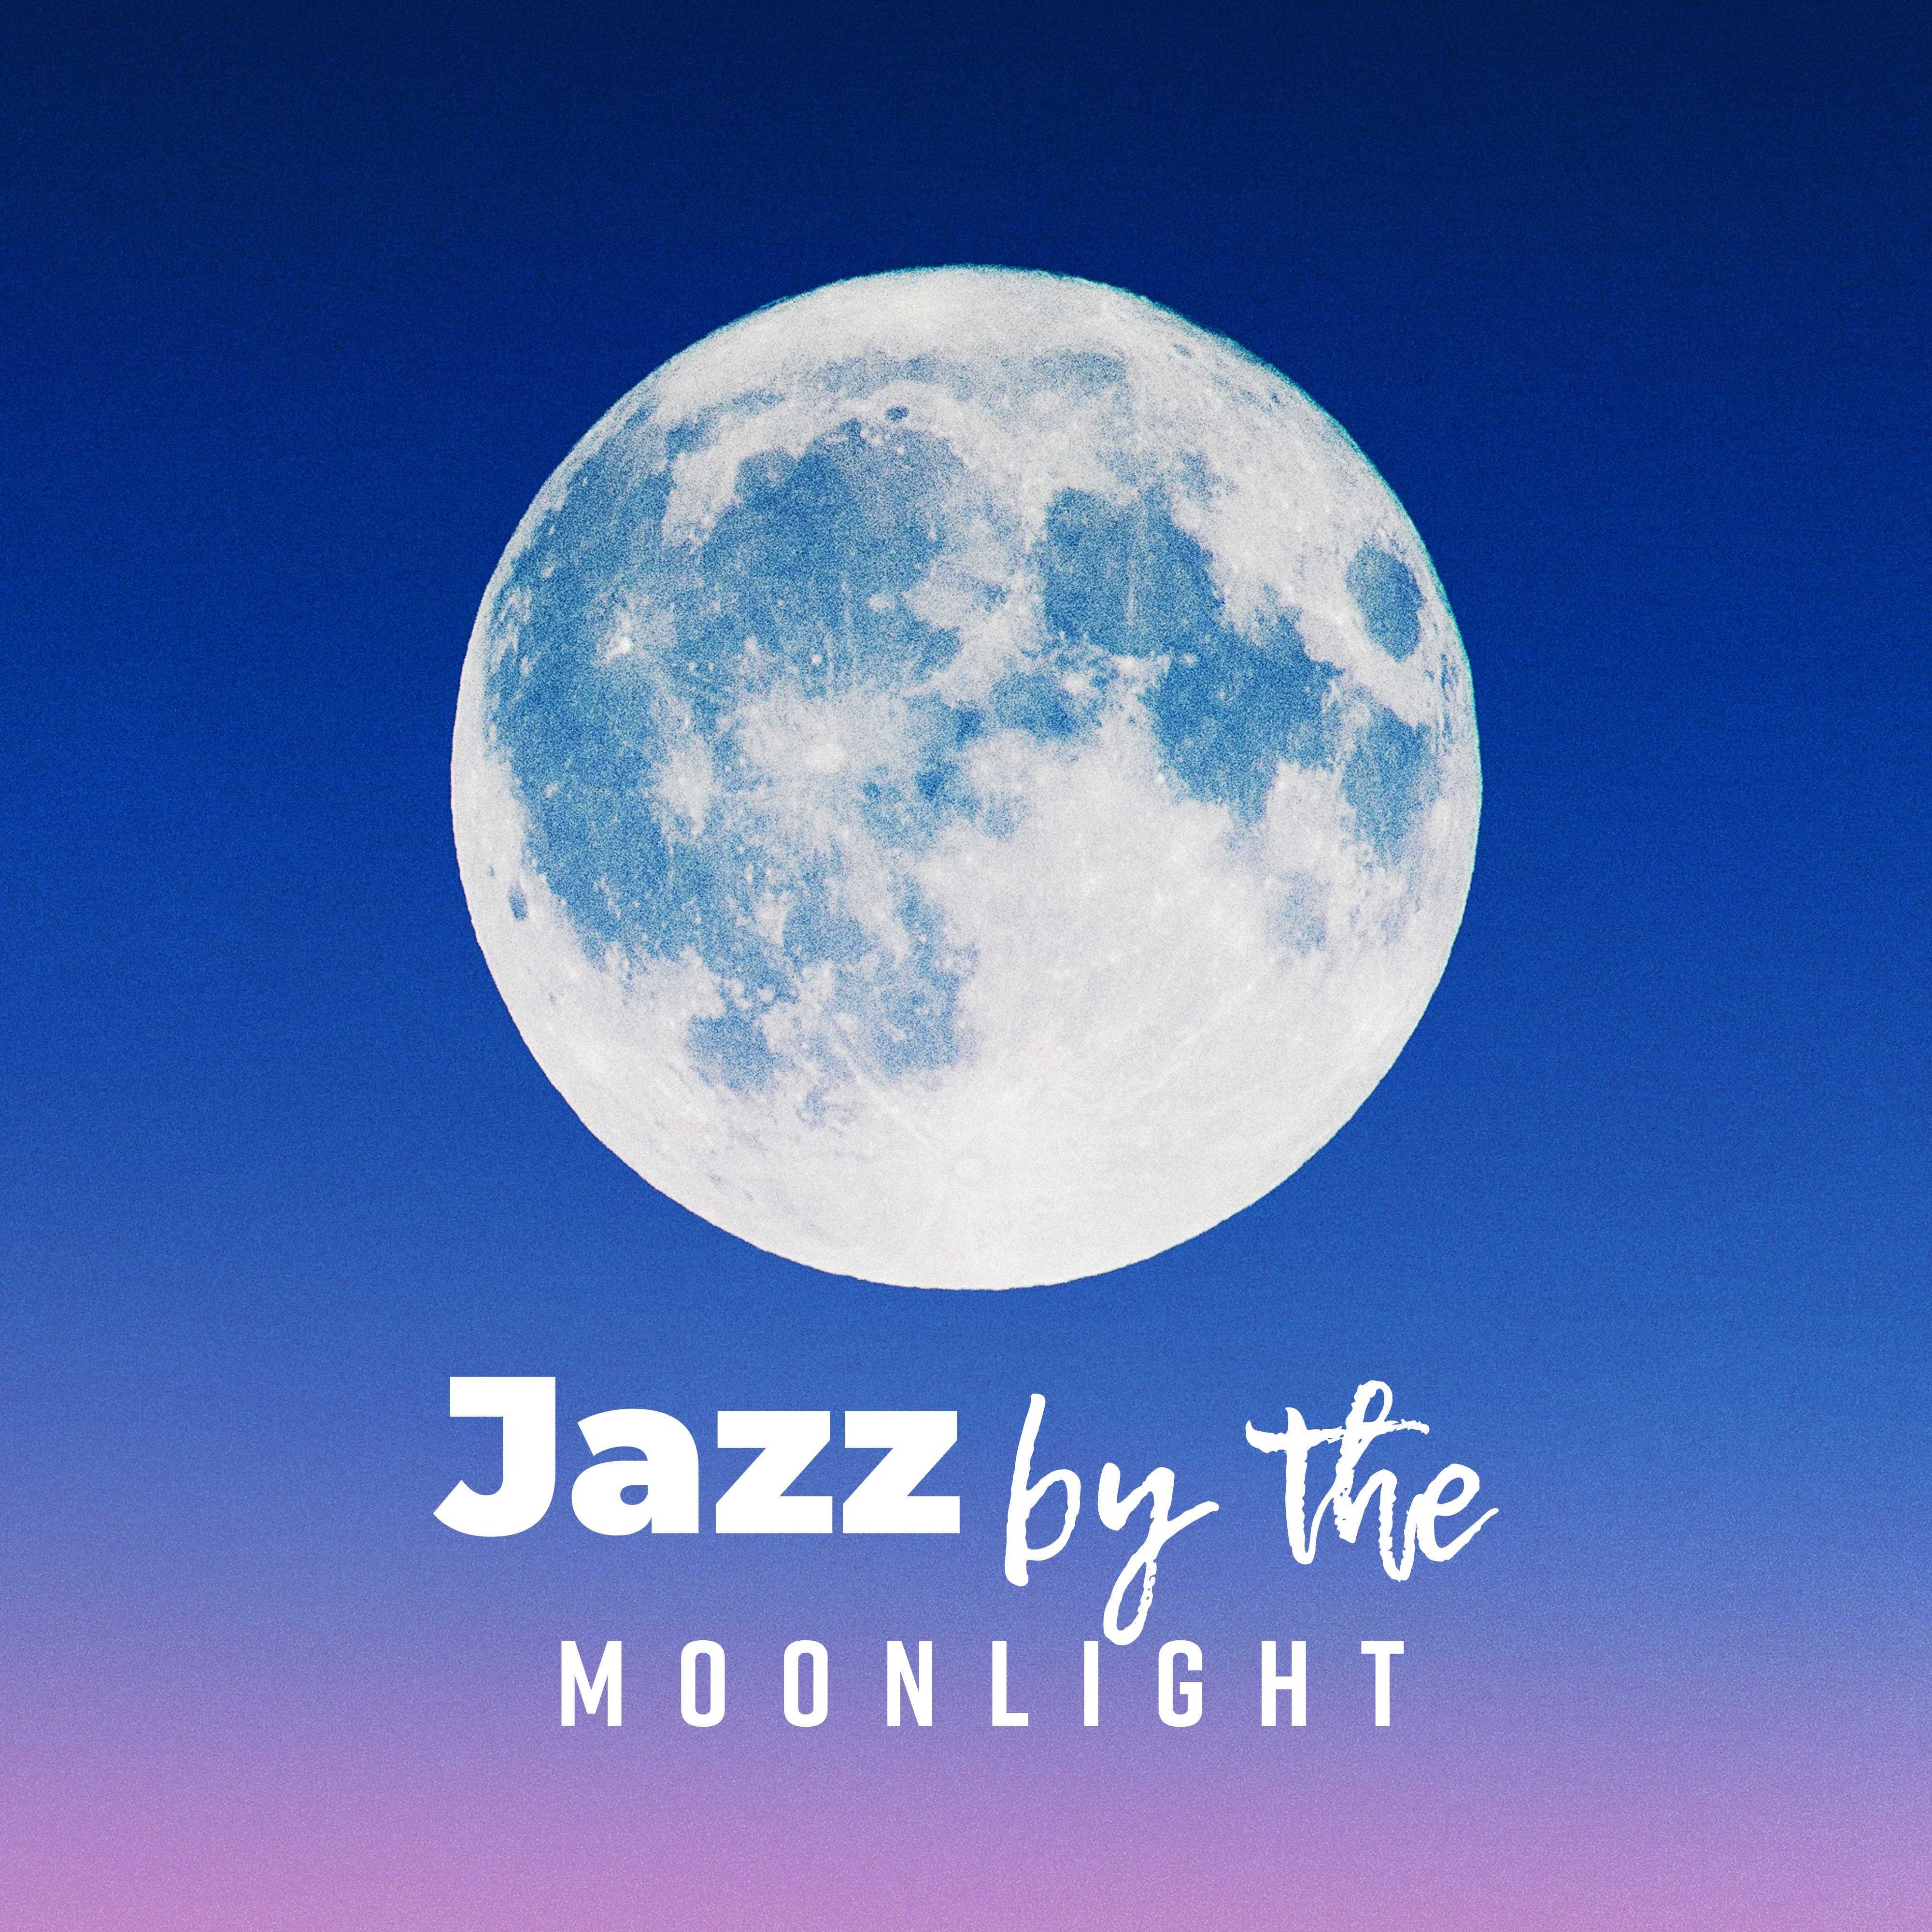 Jazz by the Moonlight: Music for Rest, Relaxation and Stress Relief after an Entire Day of Duties